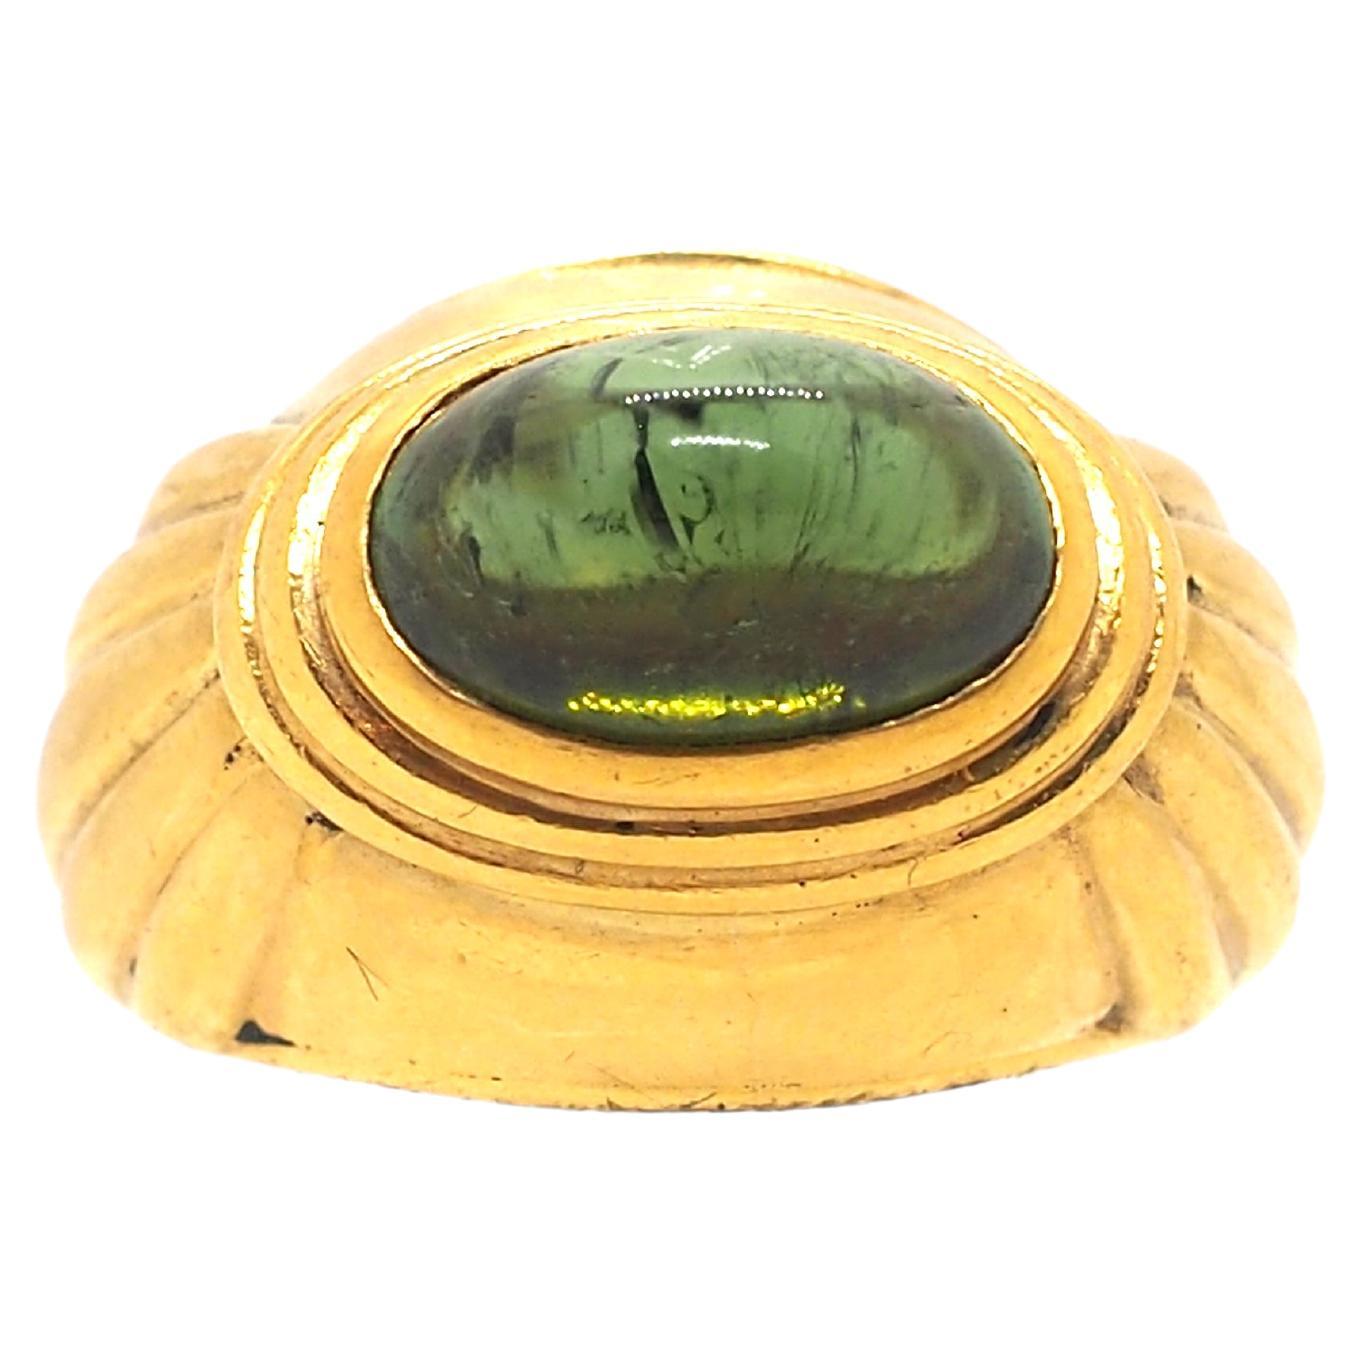 Indulge in luxury with this exquisite vintage 18K yellow gold ring from the Boucheron Jaipur collection, featuring a stunning green tourmaline cabochon cut stone. 

Inspired by the beauty of Jaipur, this ring exudes elegance and sophistication.